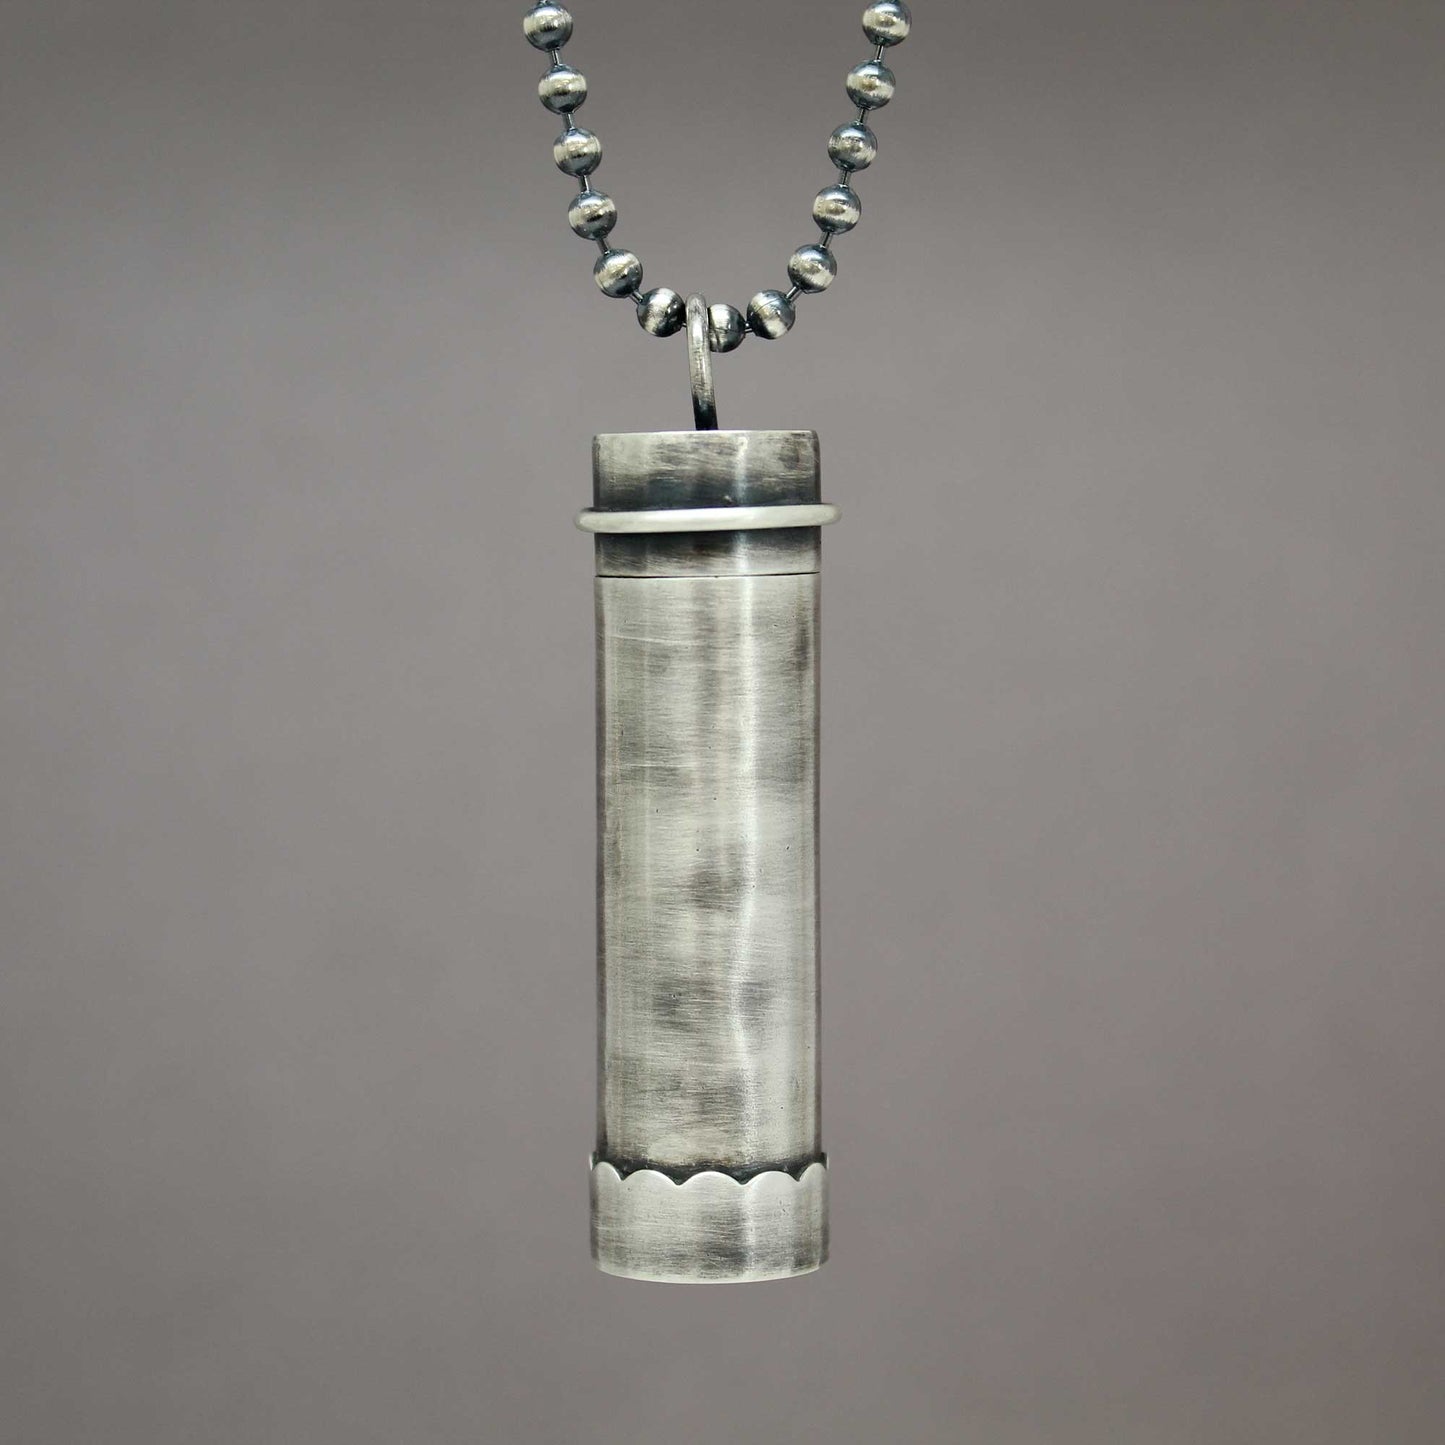 Handmade Sterling Silver Nested Pendant Necklace – Kathy Bankston